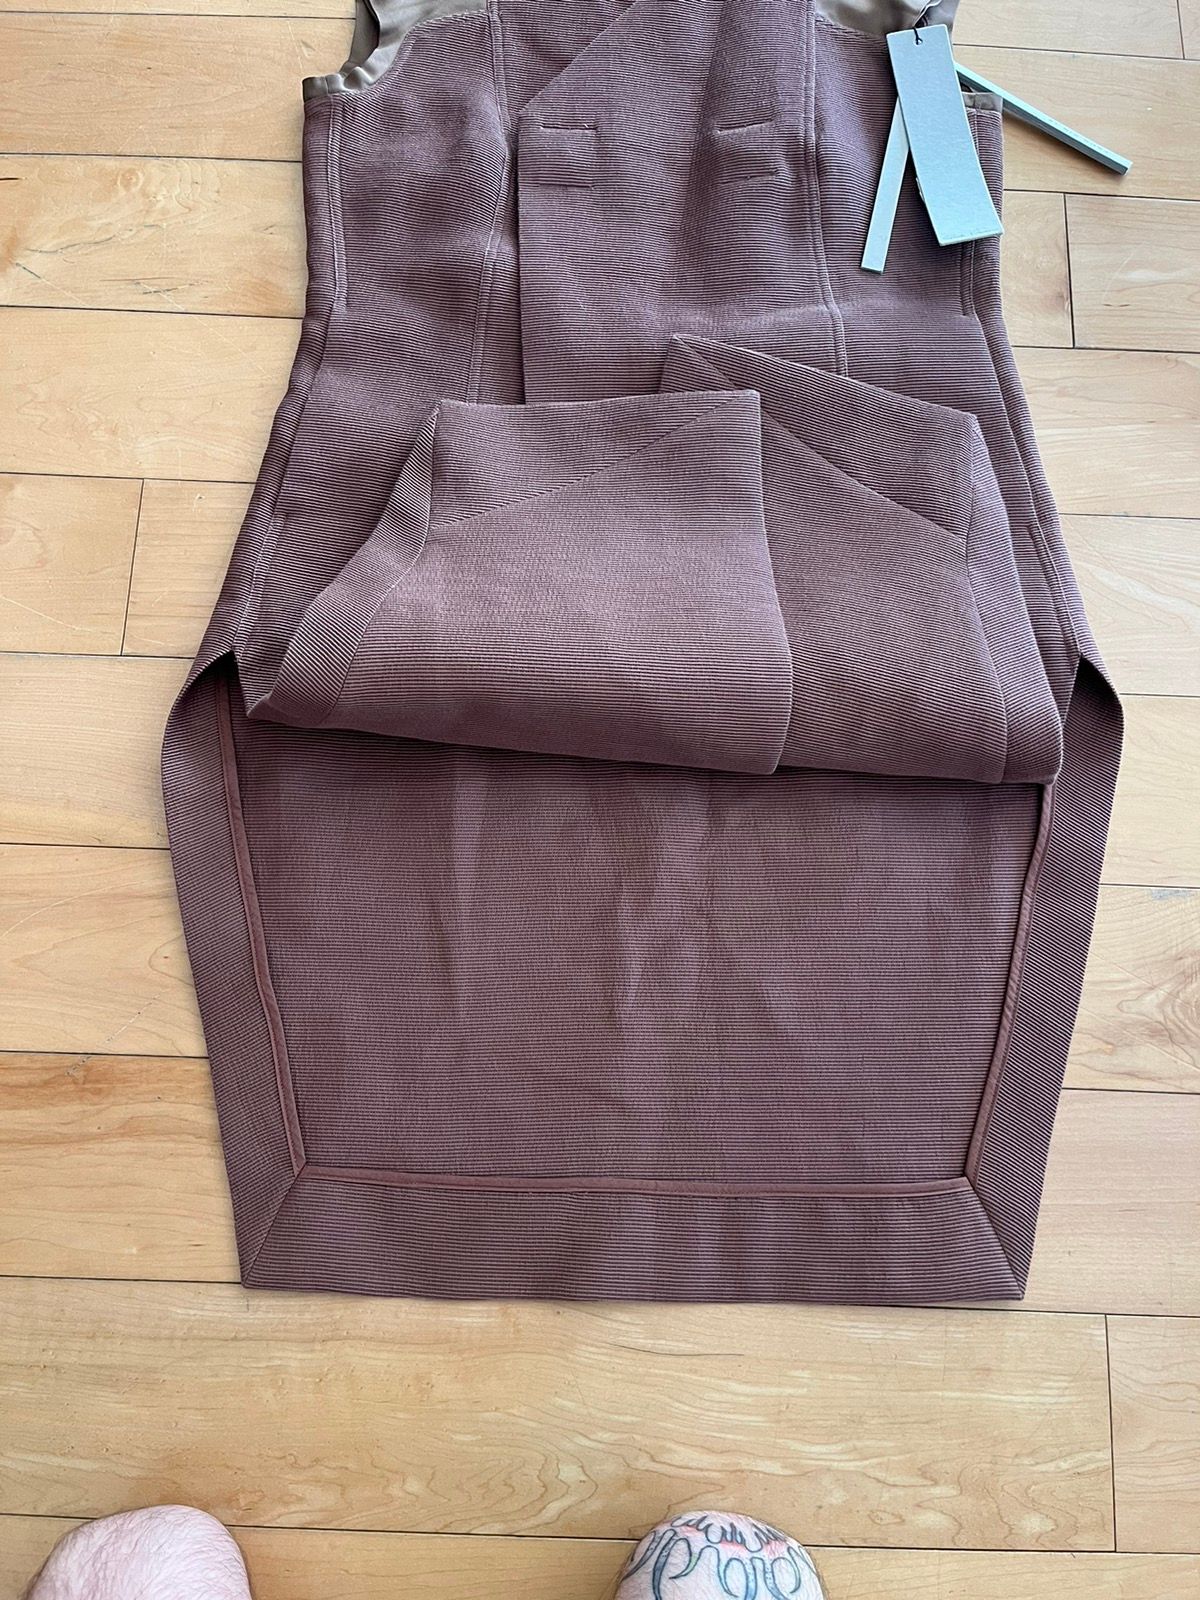 NWT - Rick Owens SS15 Sienna Duster Vest - 3